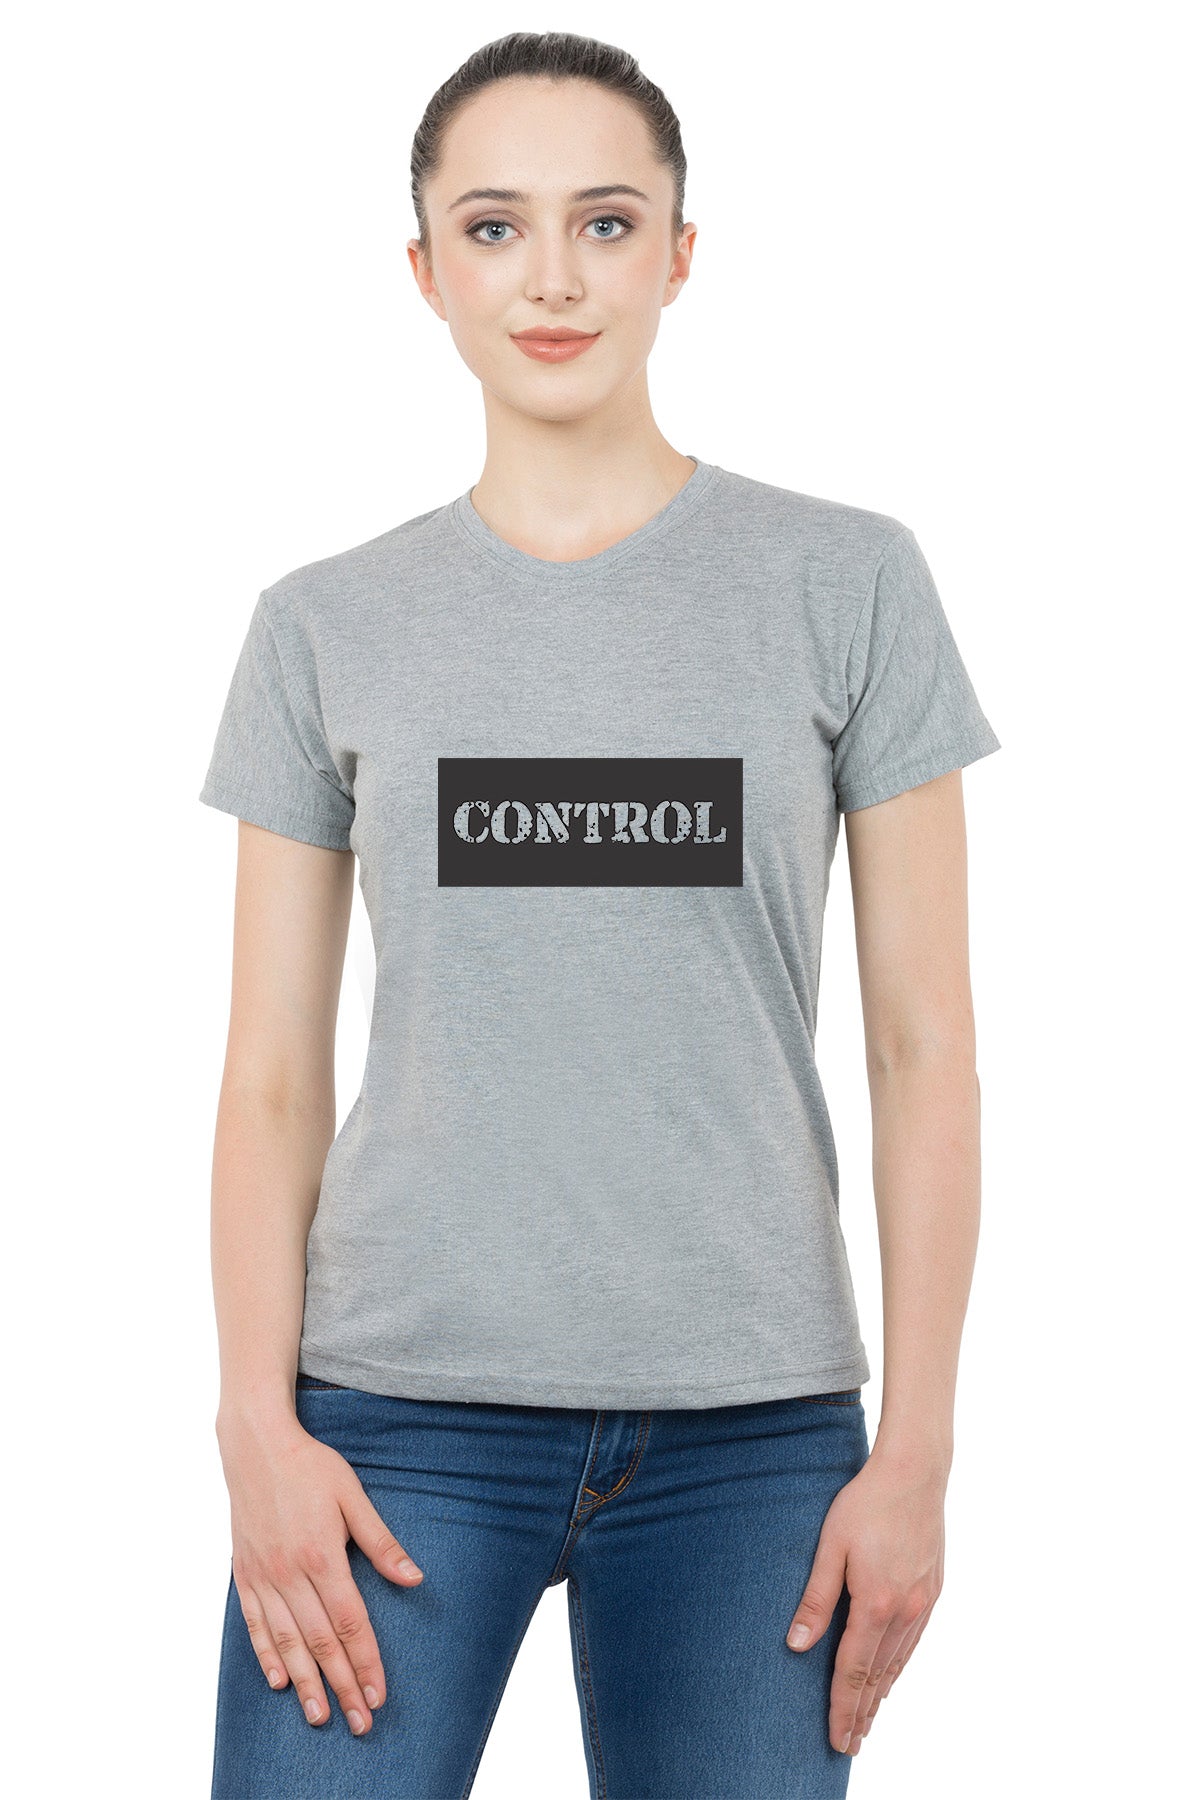 Remote Control matching Couple T shirts- Grey